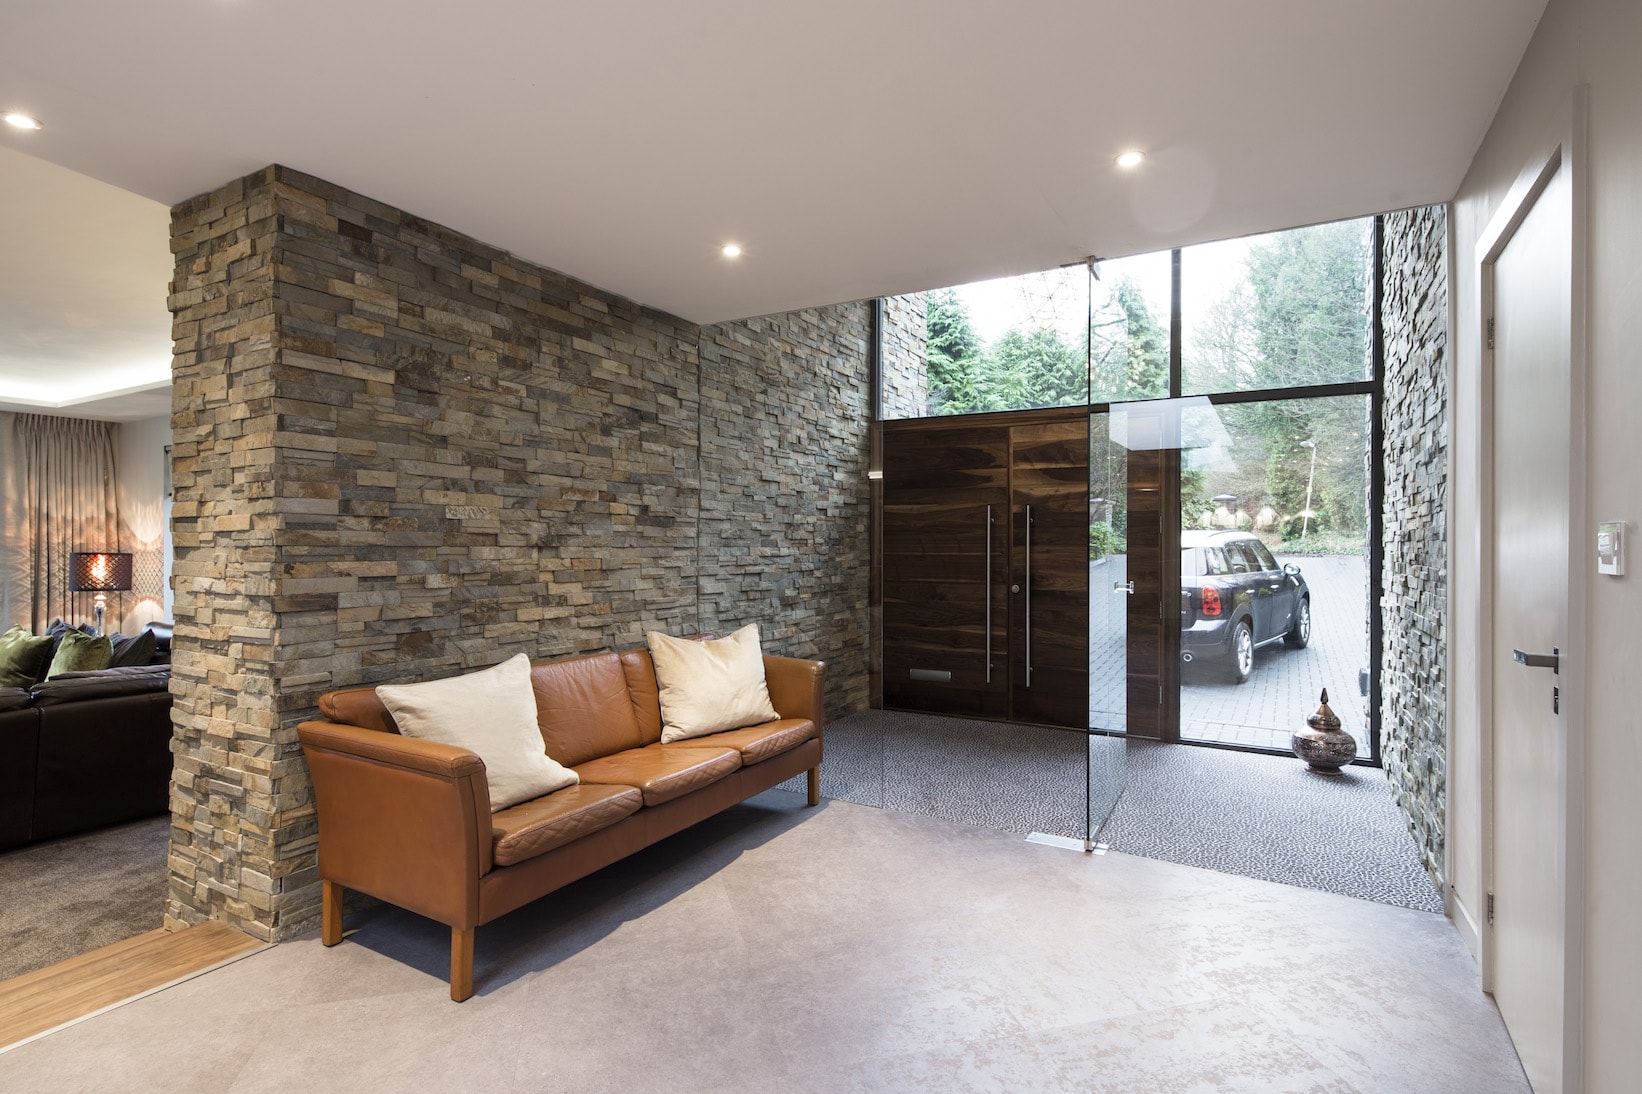 Norstone Ochre Slimline Rock Panels used on both the interior and exterior of a residential entryway